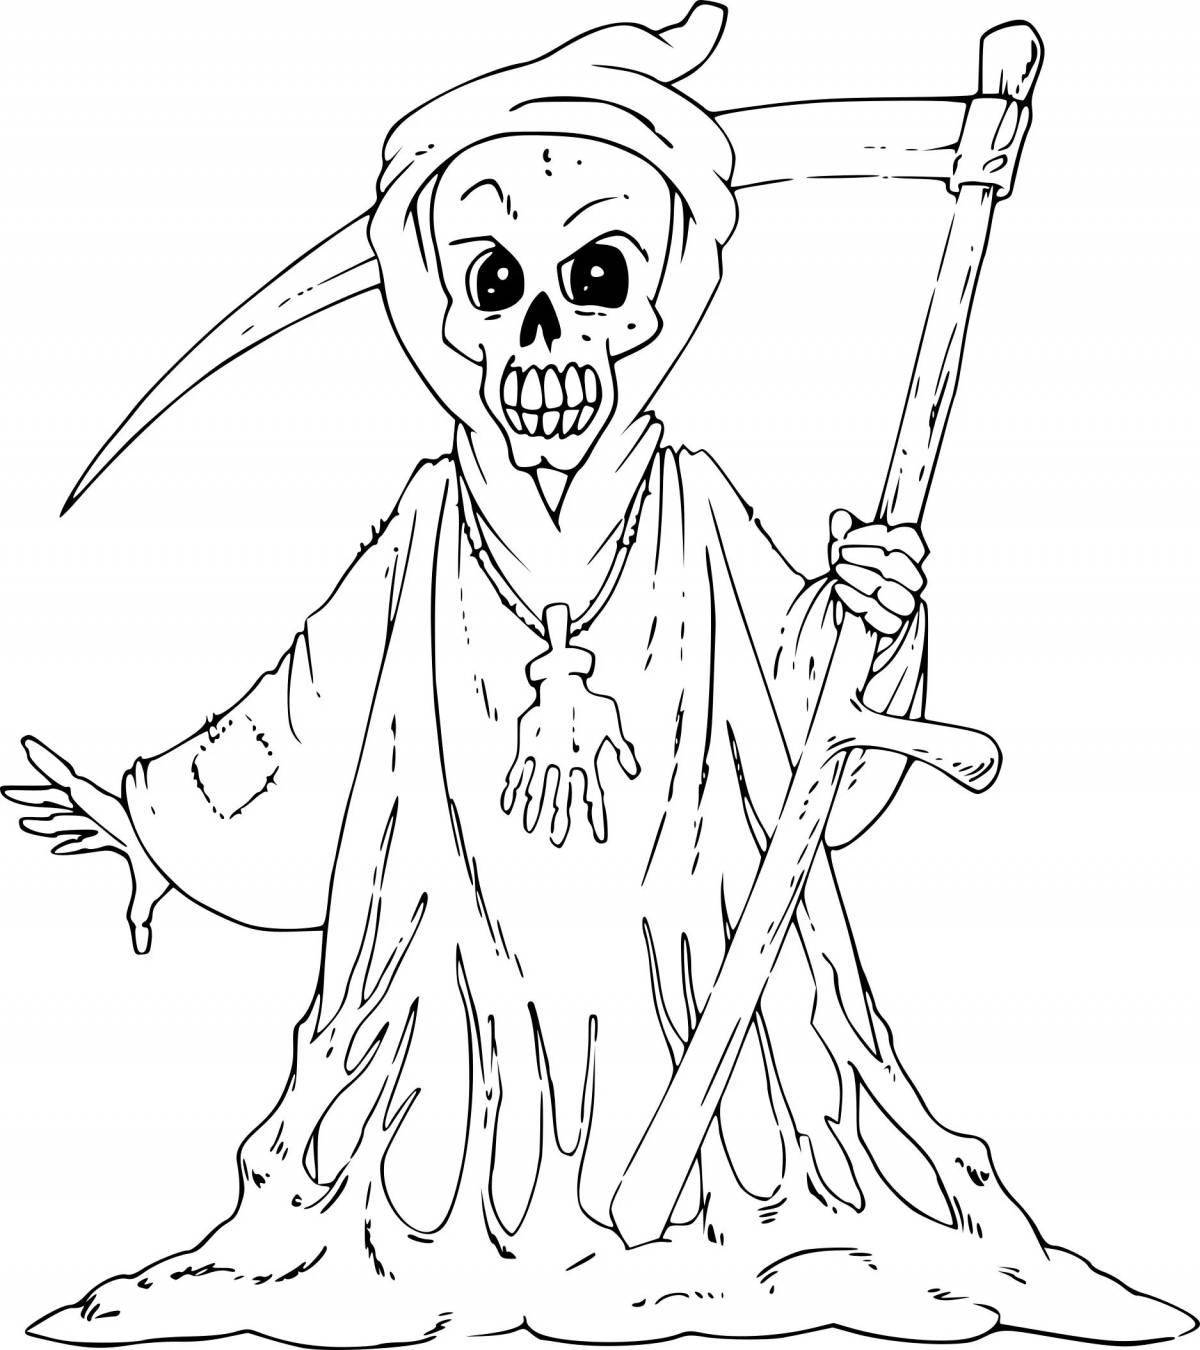 Vile scary baby coloring page